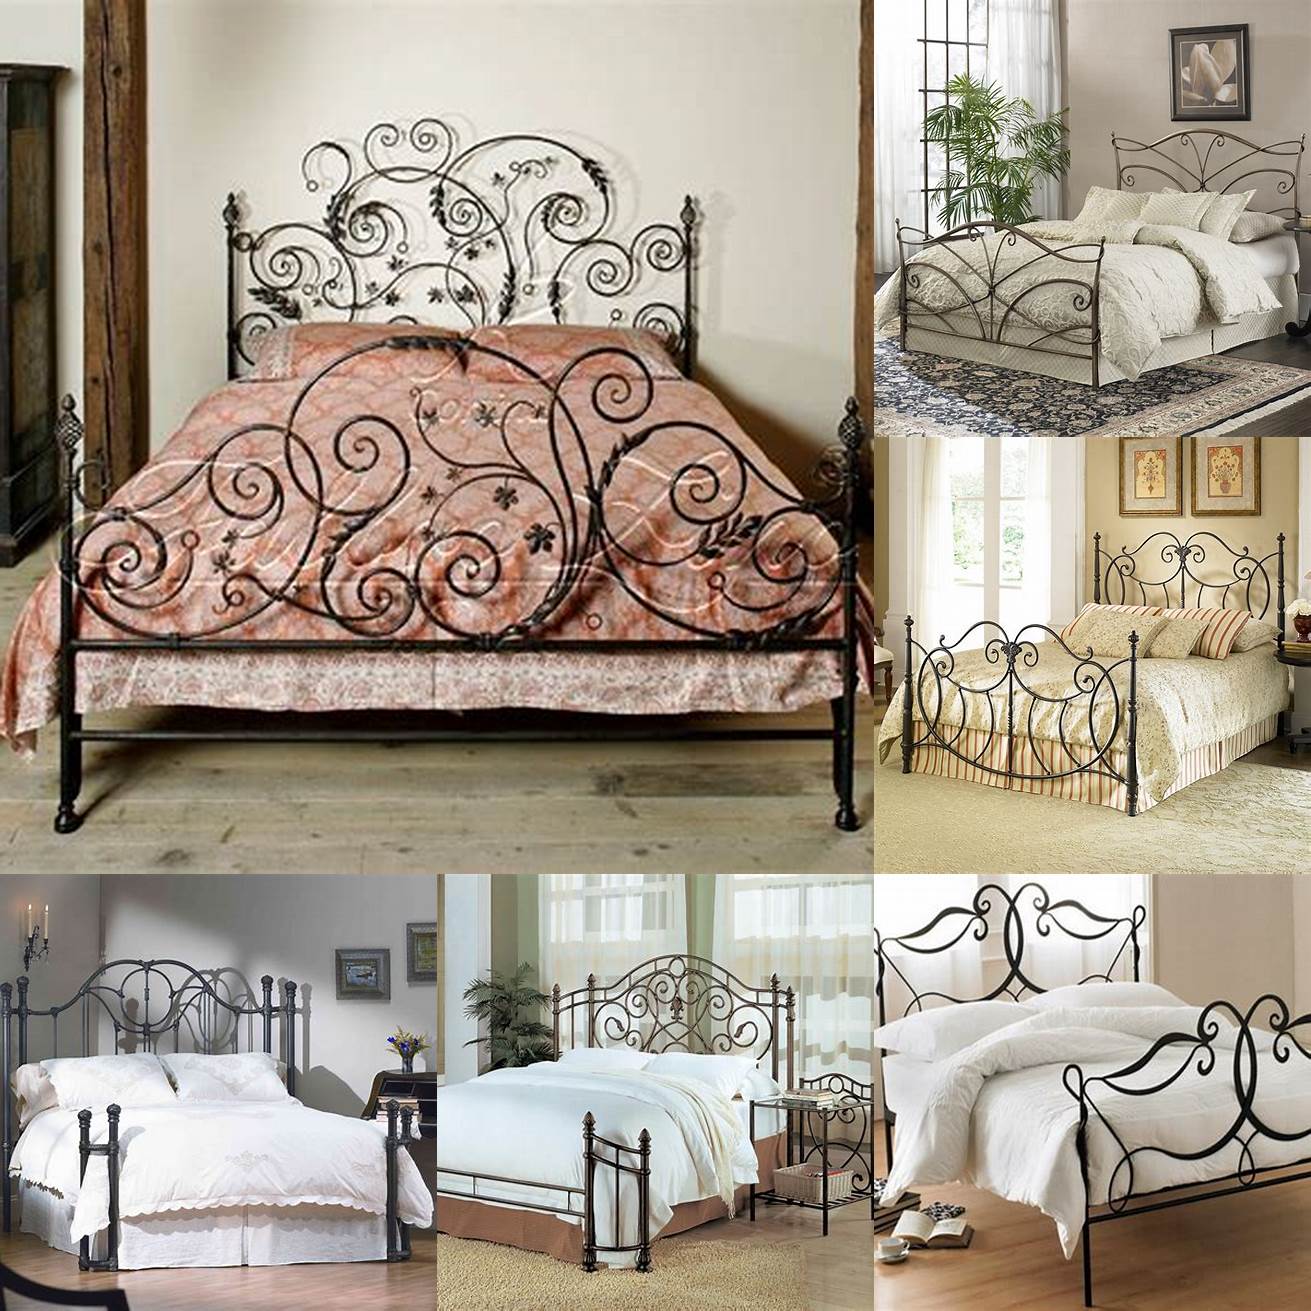 Wrought Iron Bed A wrought iron bed has a handmade and intricate design